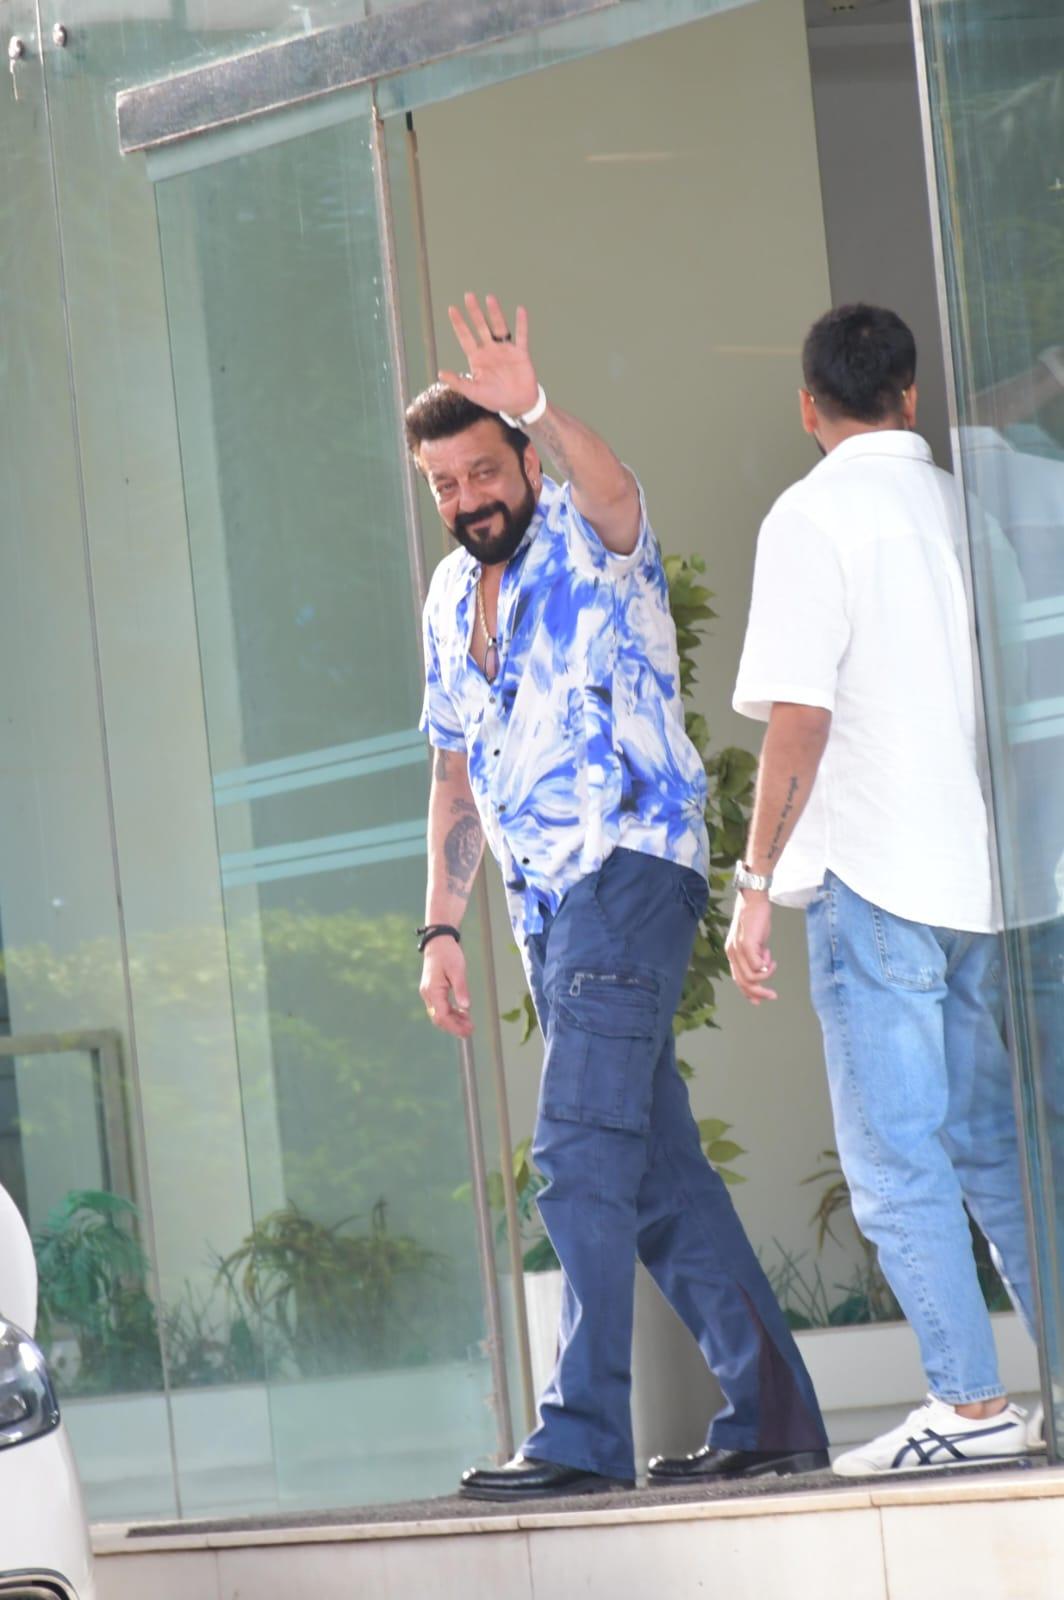 Sanjay Dutt, the iconic actor of Bollywood, was captured at an office in the city.